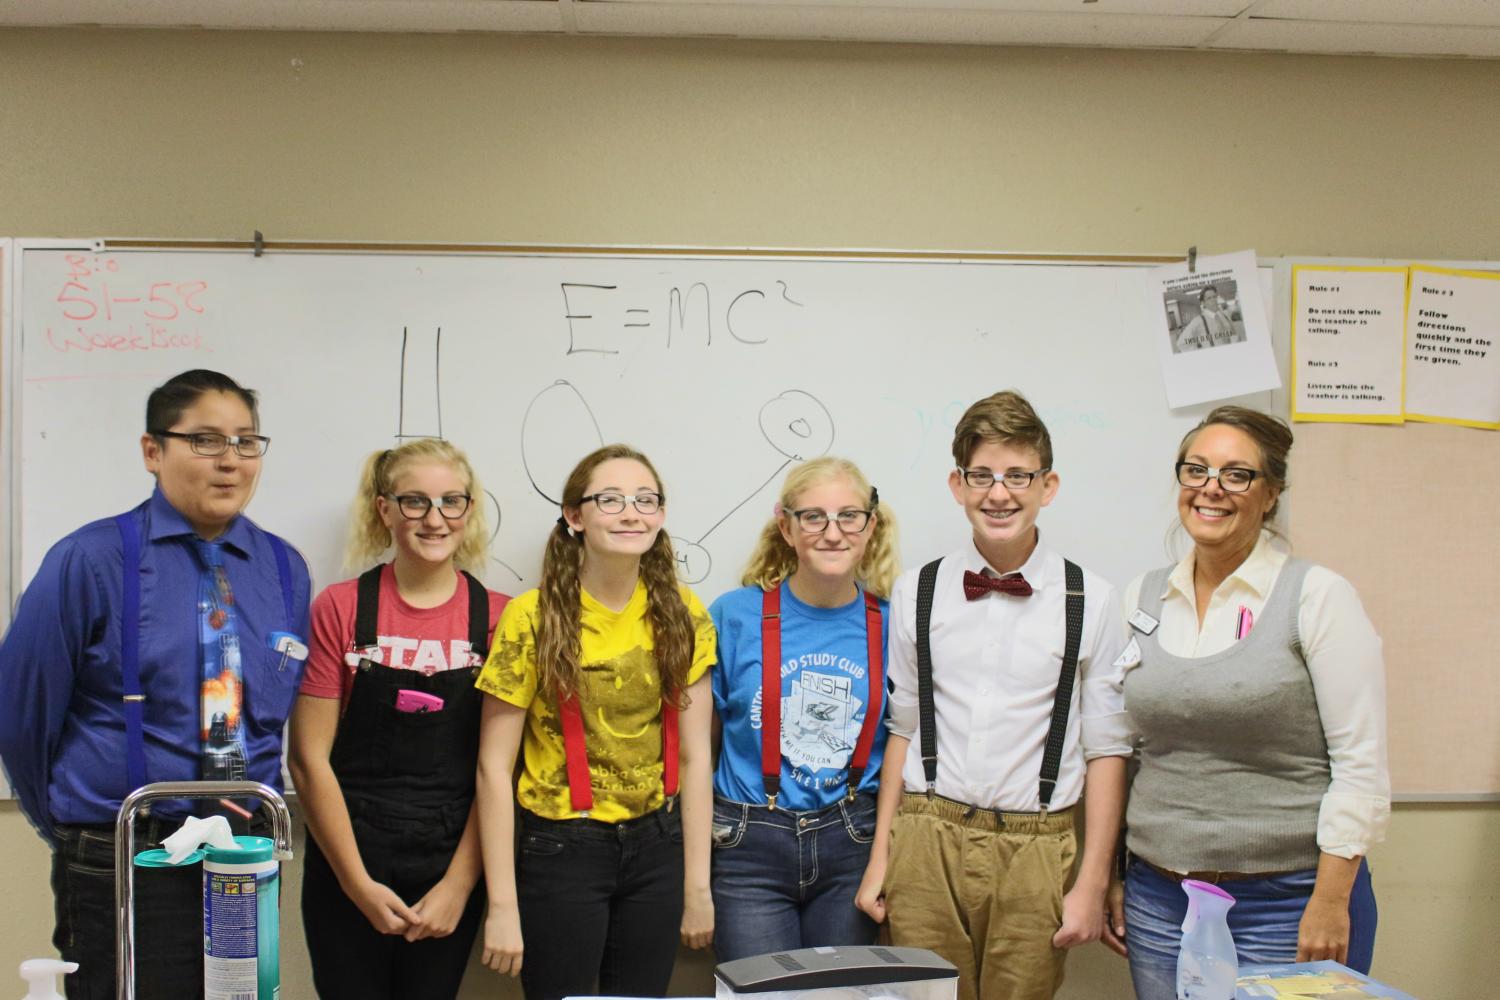 Ms. K, with some of her nerds